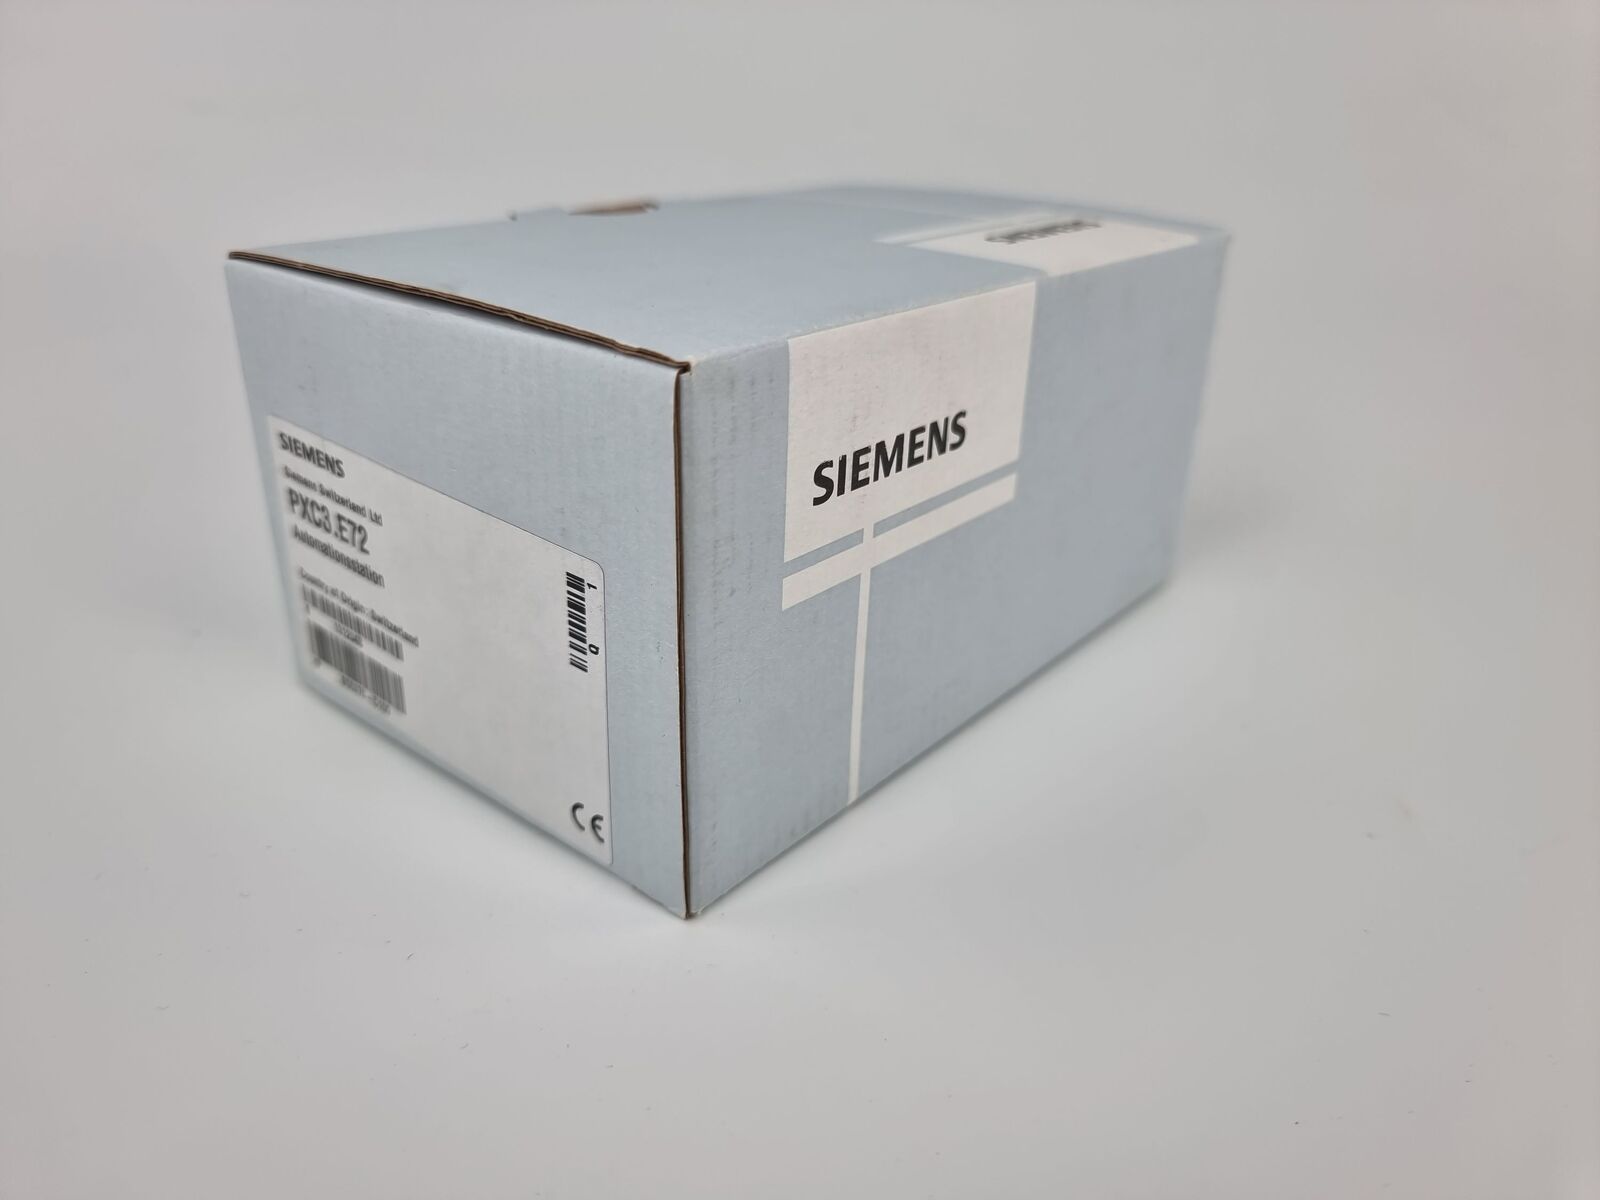 SIEMENS PXC3.E72 AUTOMATION STATION BACNET/IP AND DALI 12-3 S55376-C100